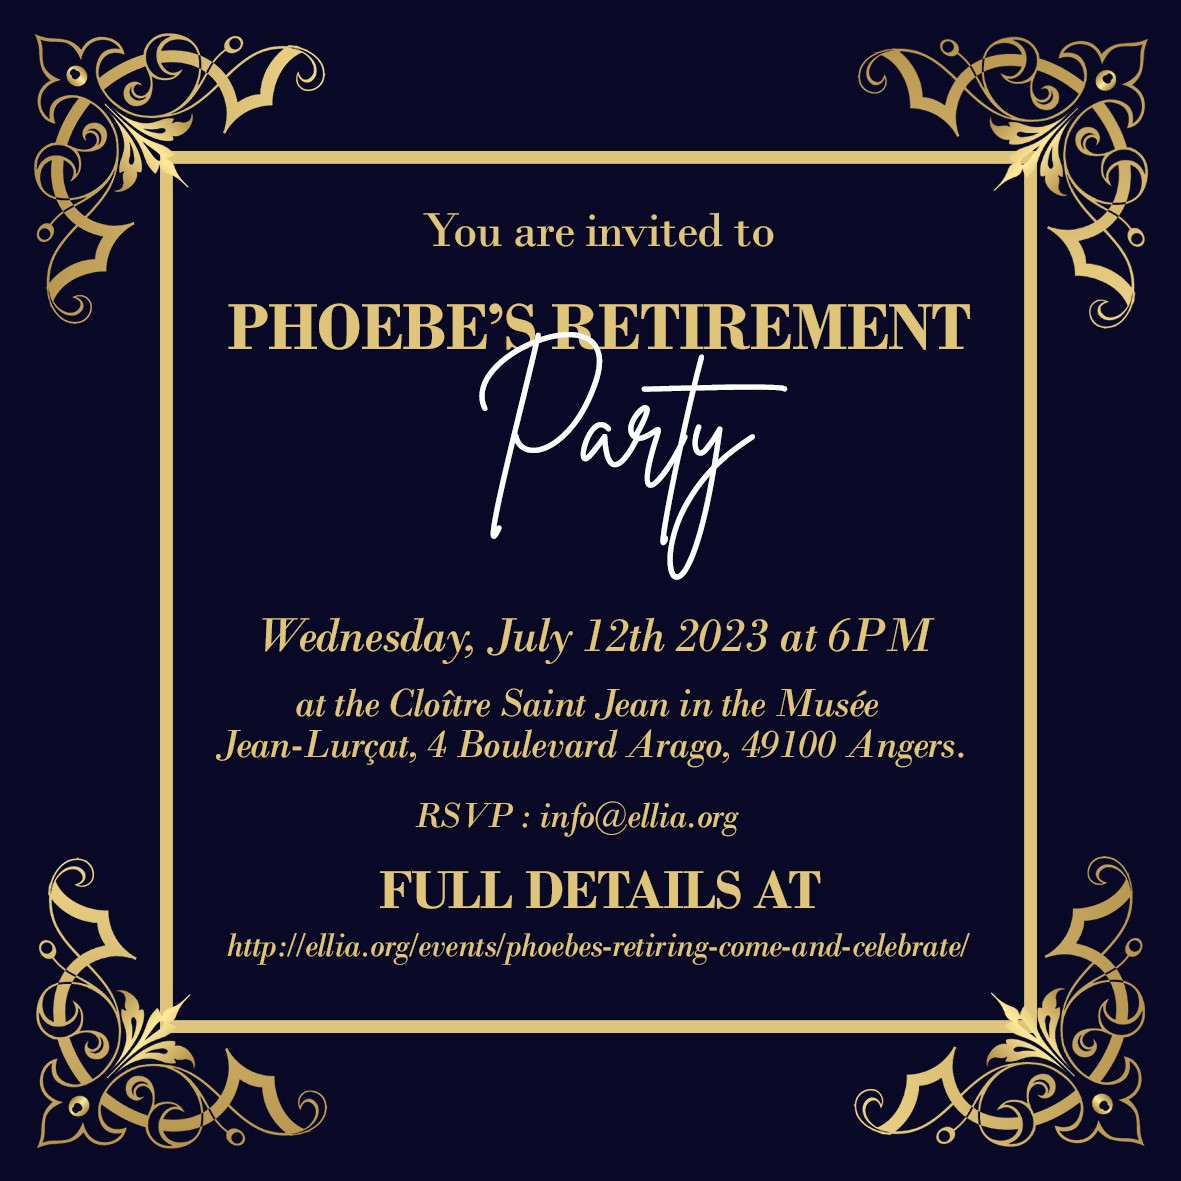 Phoebe's retiring! Come and celebrate!